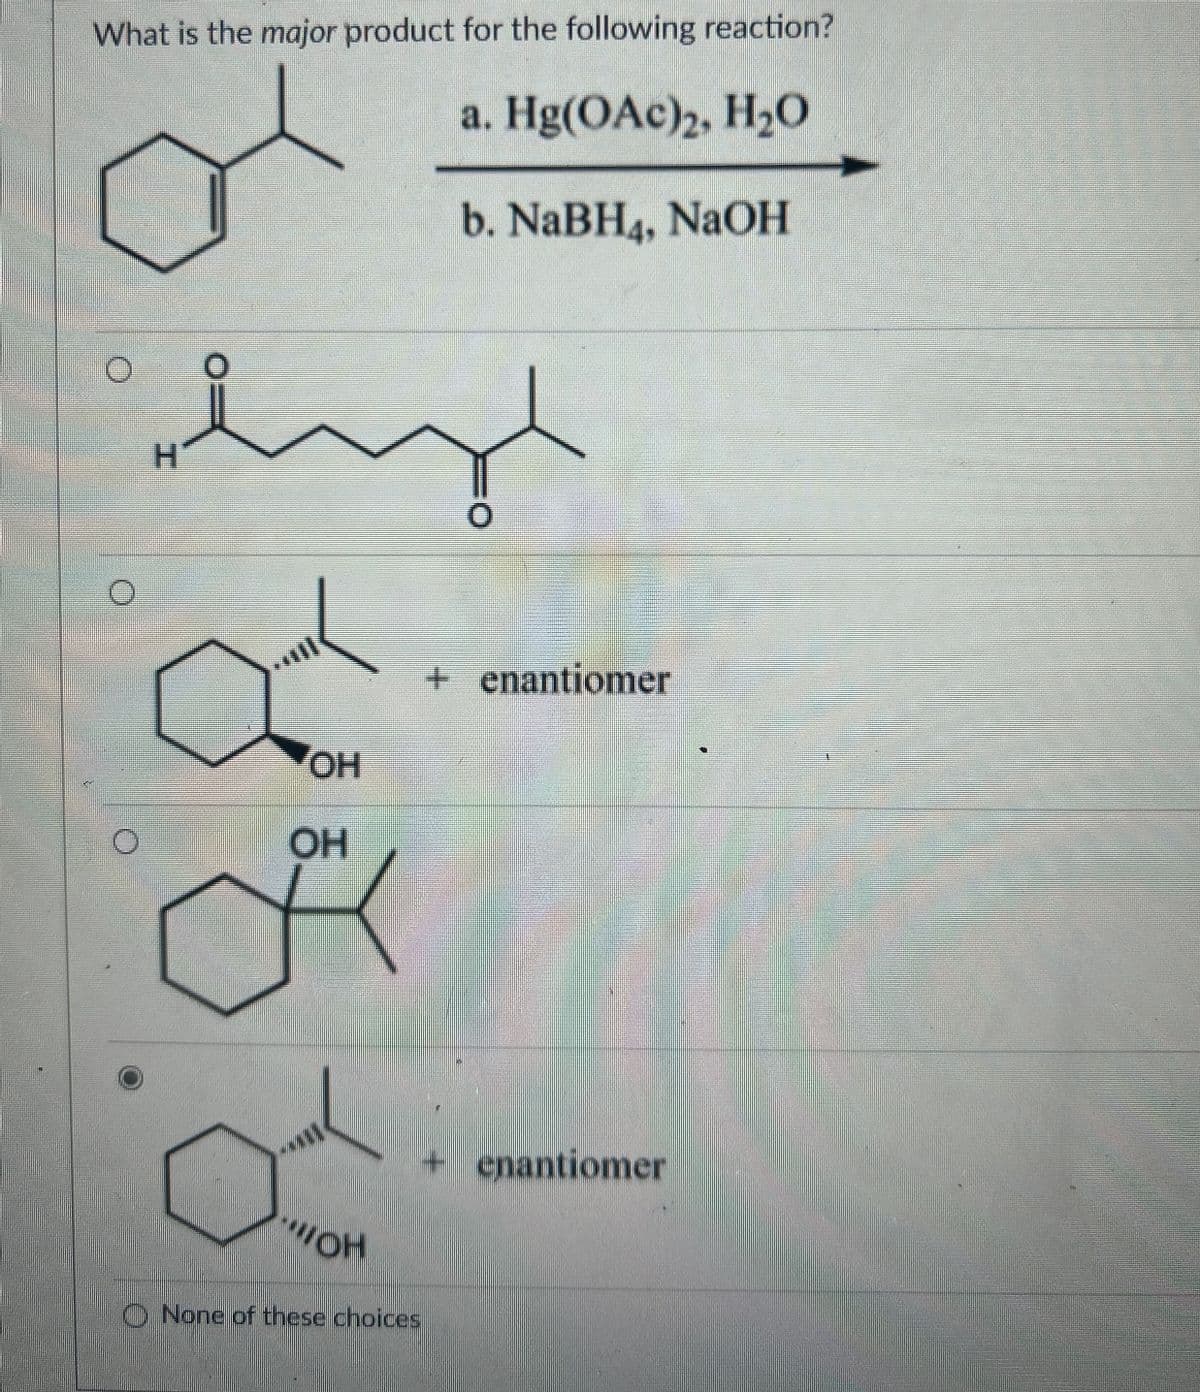 What is the major product for the following reaction?
a. Hg(OAc)2, H₂O
b. NaBH4, NaOH
H
OH
+ enantiomer
OH
OH
+ enantiomer
None of these choices